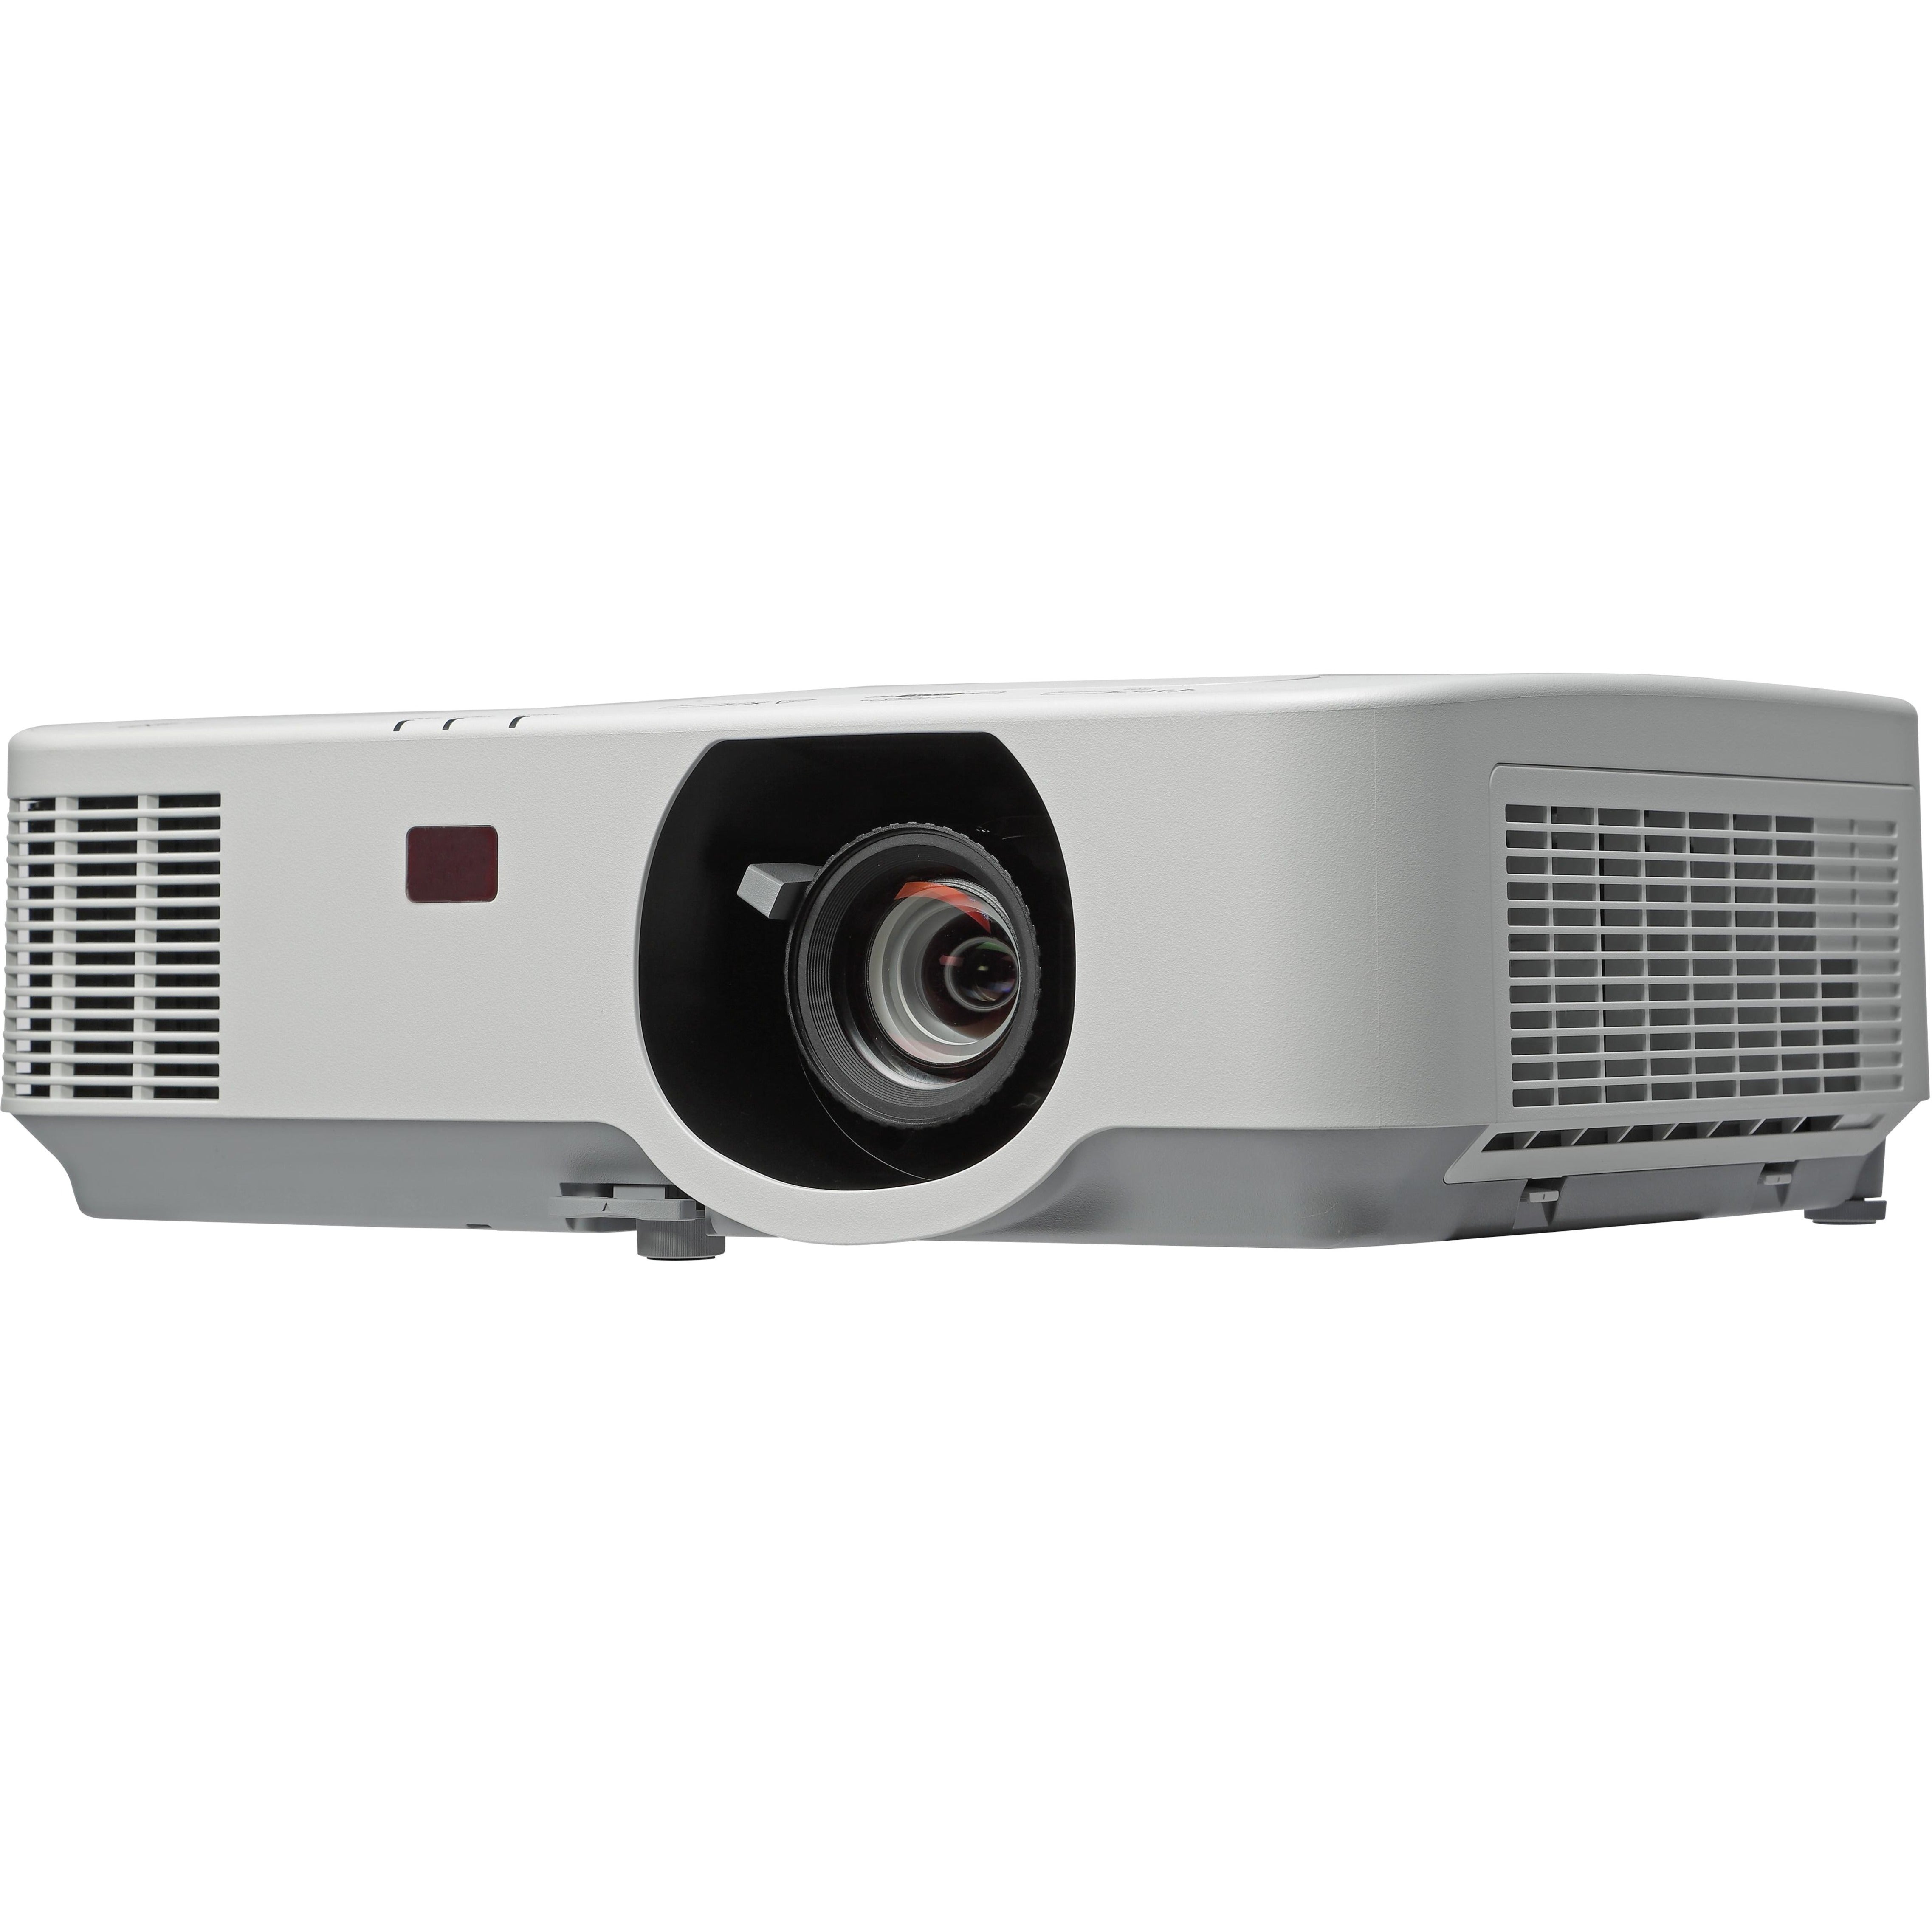 NEC Display P474W LCD Projector - 4700-lumen Entry-Level Professional Installation Projector [Discontinued]